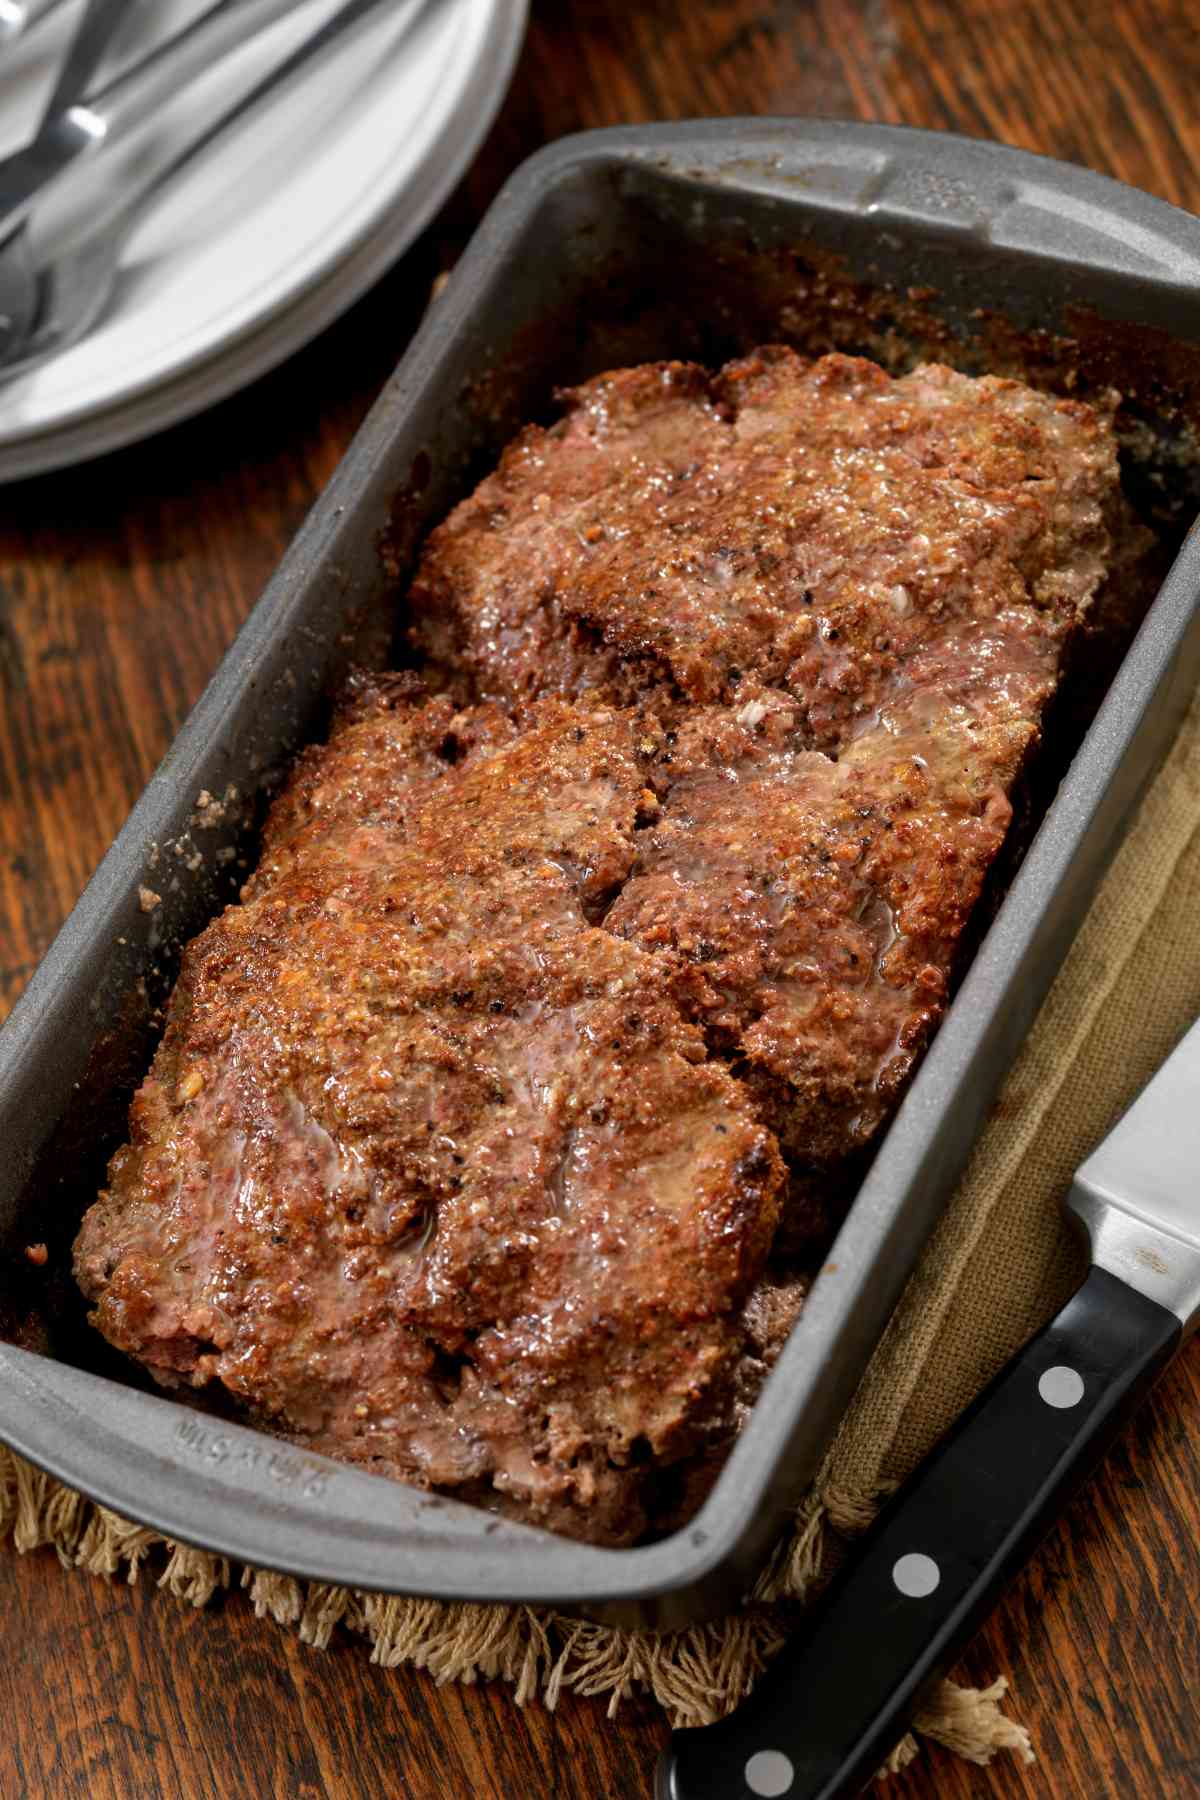 For the most delicious homemade meatloaf, you’ve got to pay attention to both the oven temp and the internal temp. At the right temperatures, your loaf will turn out moist, perfectly sliceable and full of flavor. Keep reading to find out the best oven temp, internal temp and cooking time for meatloaf!